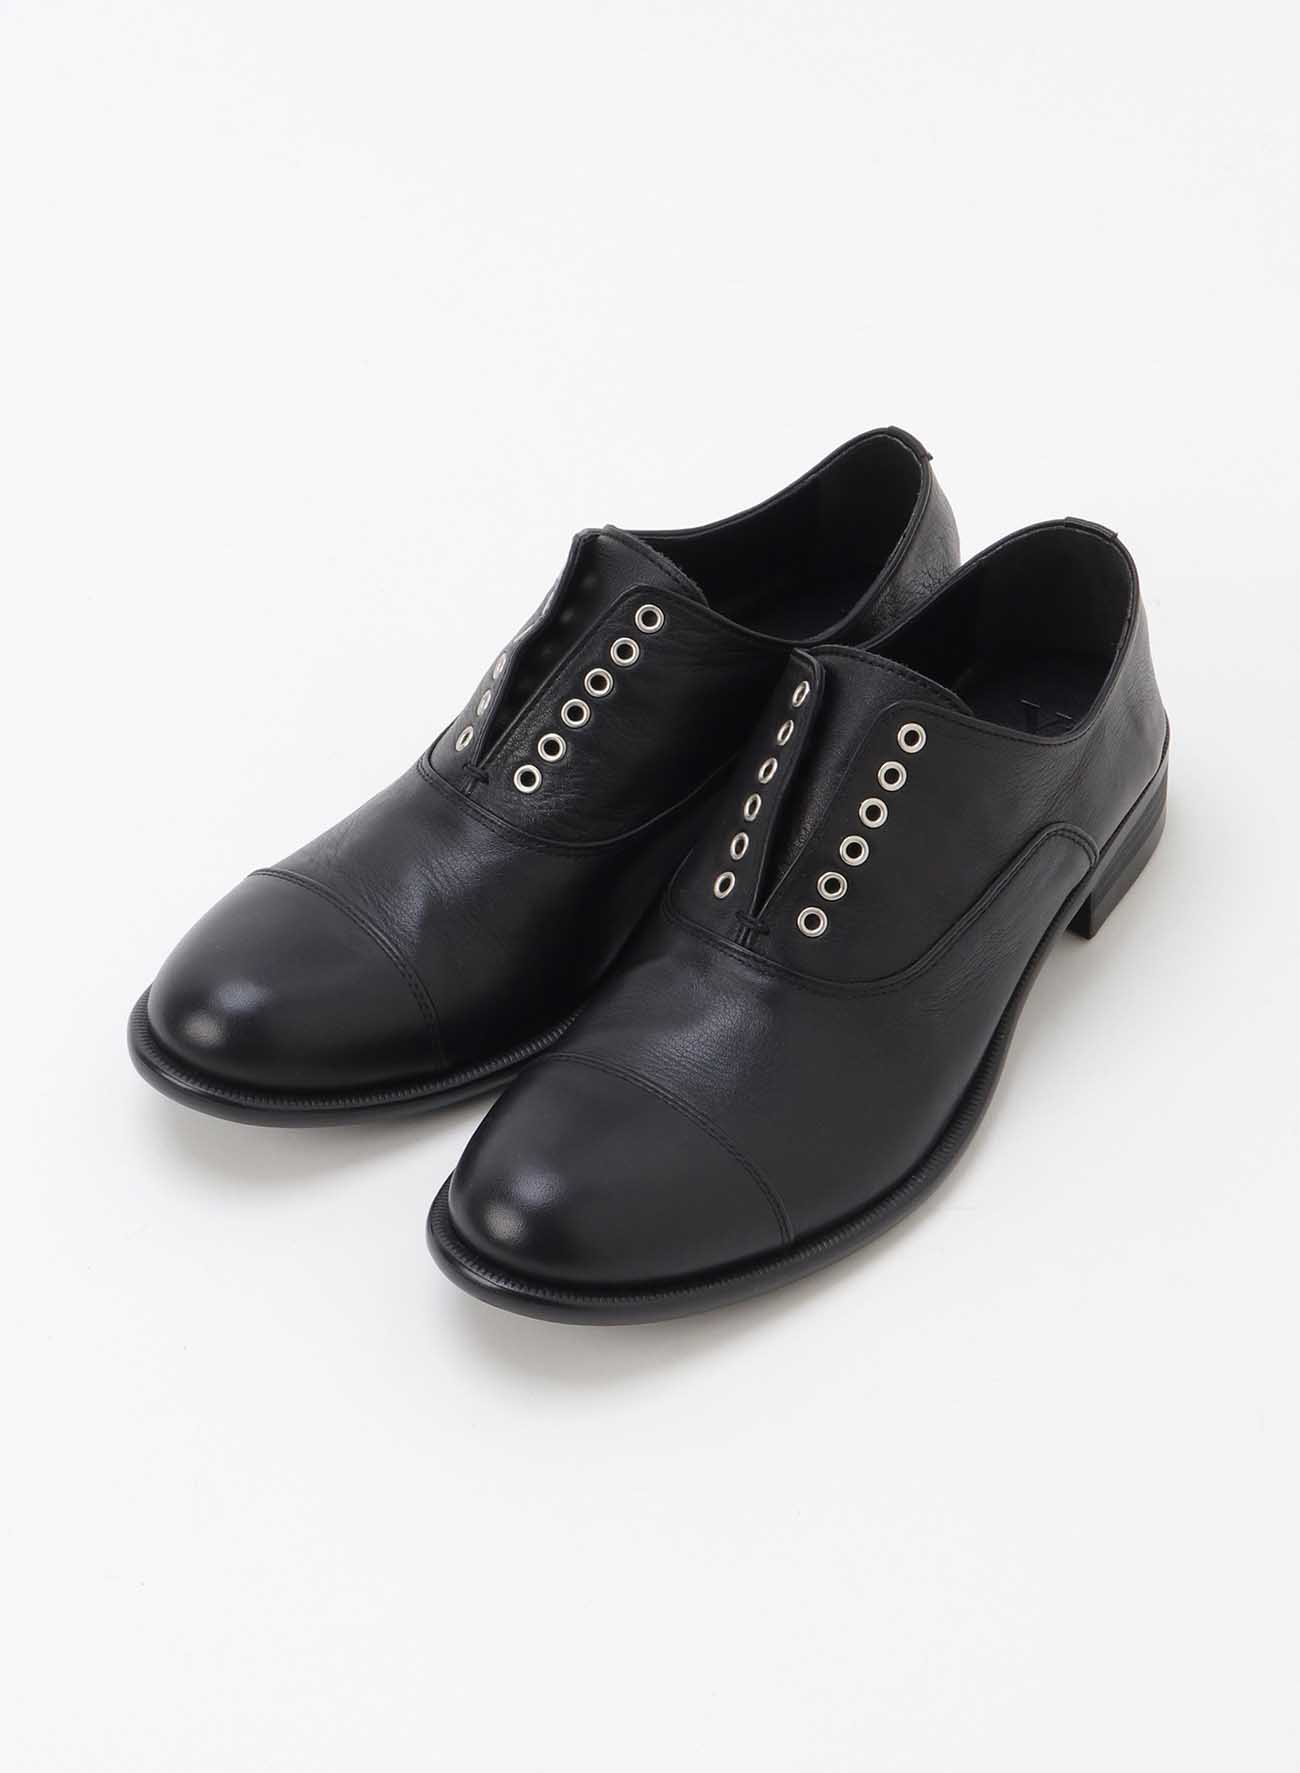 SOFT LEATHER BALMORAL SHORT SHOES